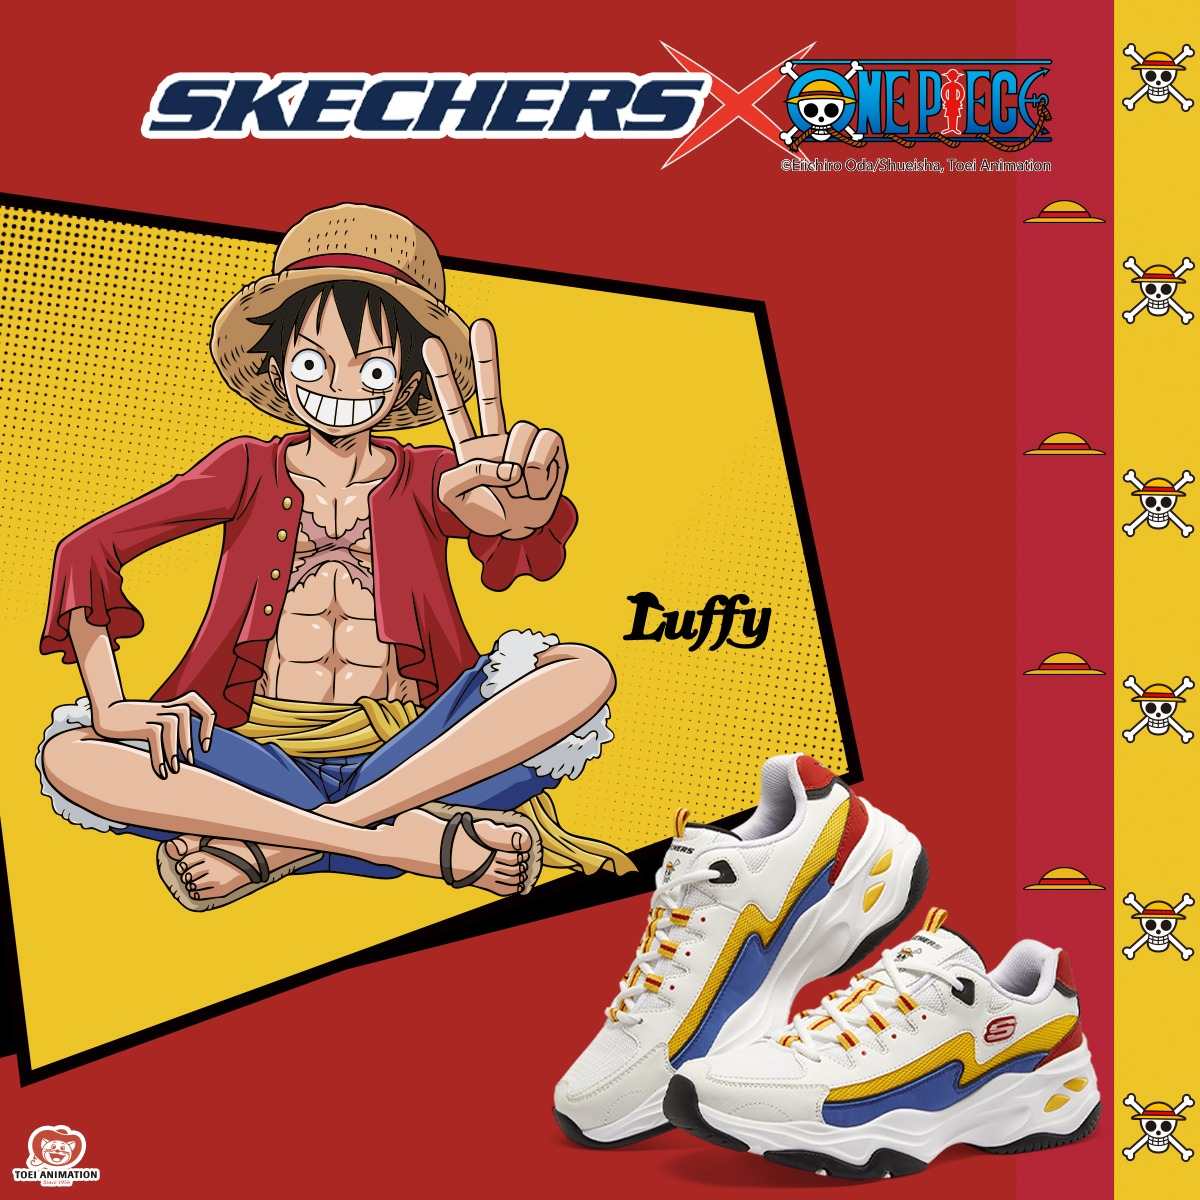 Skechers x One Piece Collection Featuring Luffy - Skechers X One Piece 系列，动漫迷们的福音！